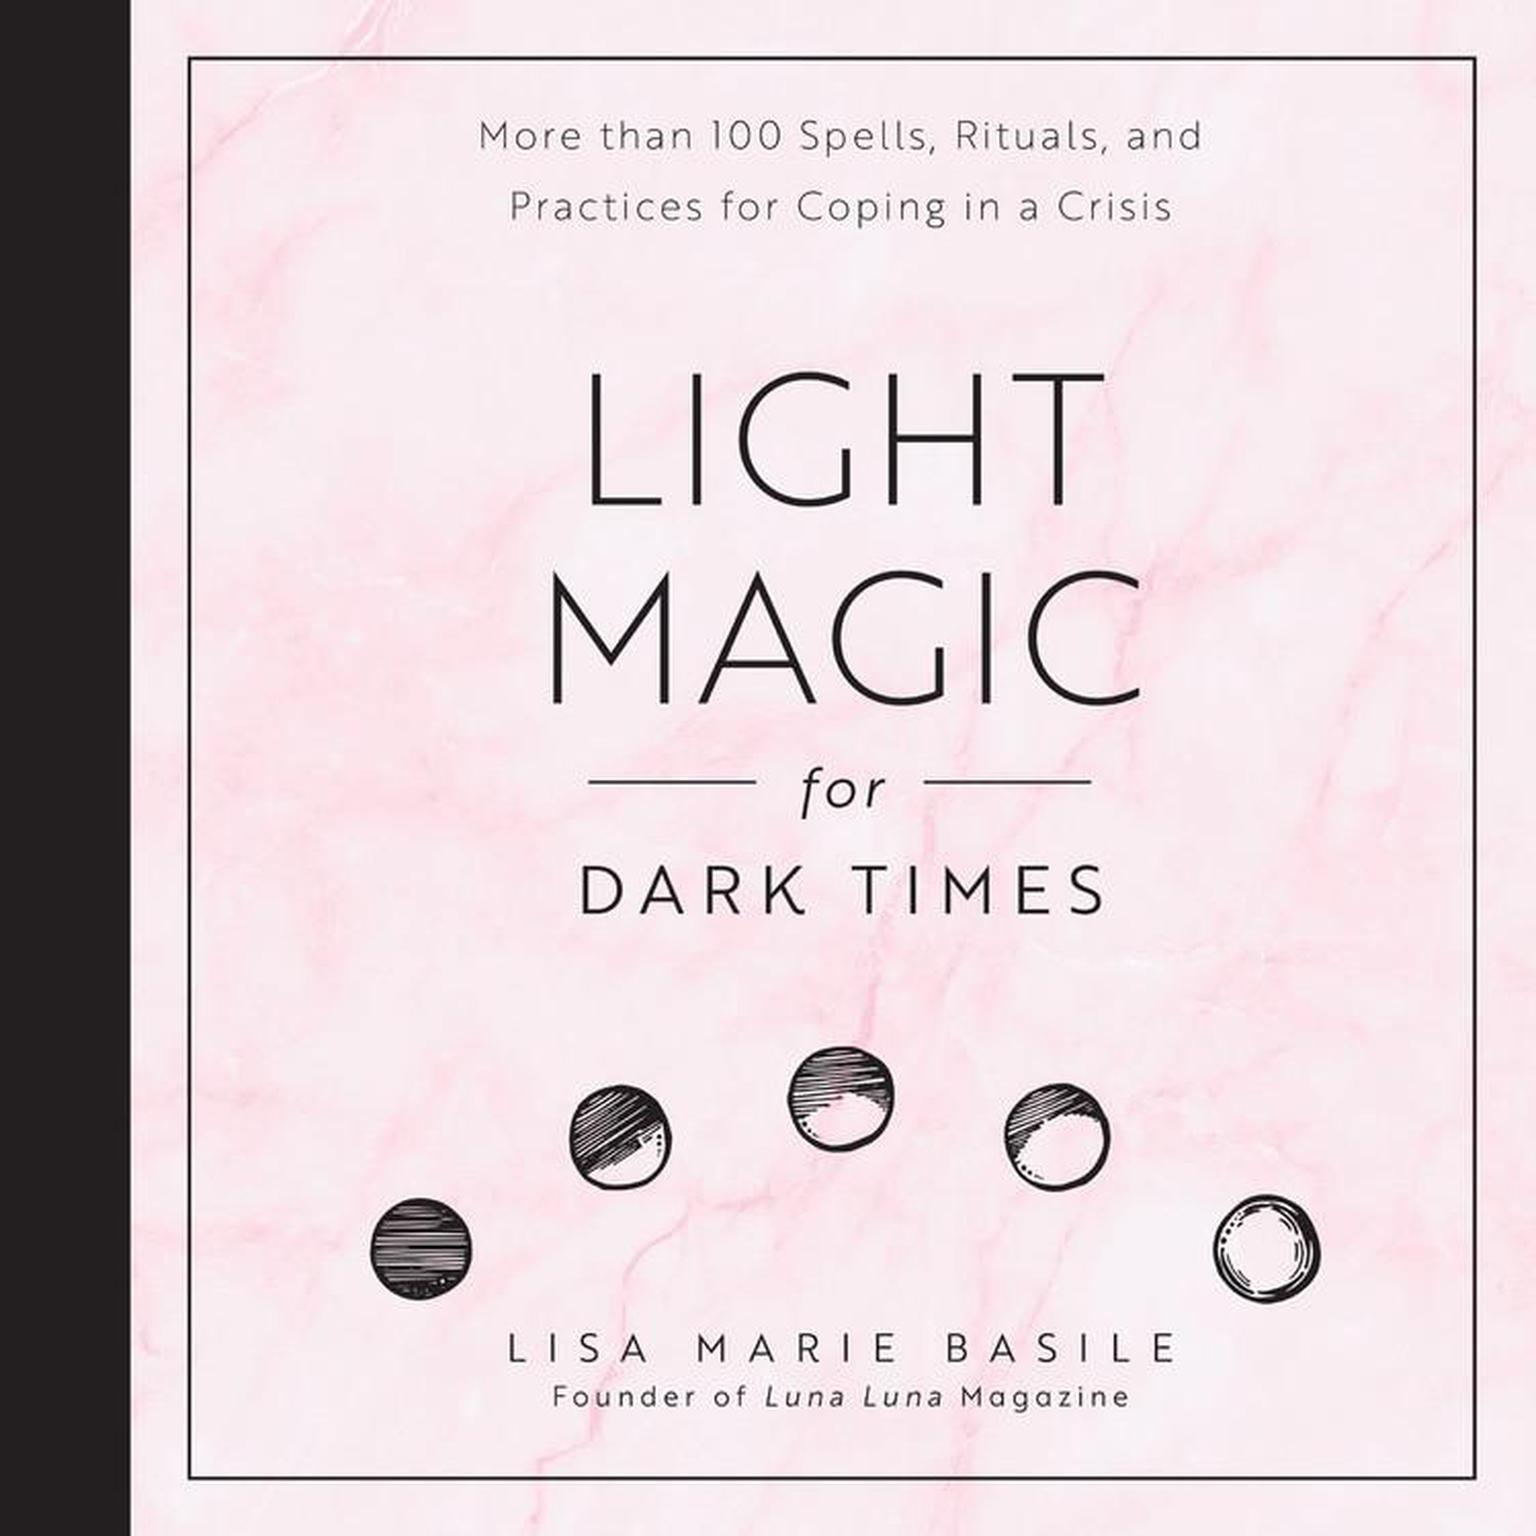 Light Magic for Dark Times: More than 100 Spells, Rituals, and Practices for Coping in a Crisis Audiobook, by Lisa Marie Basile